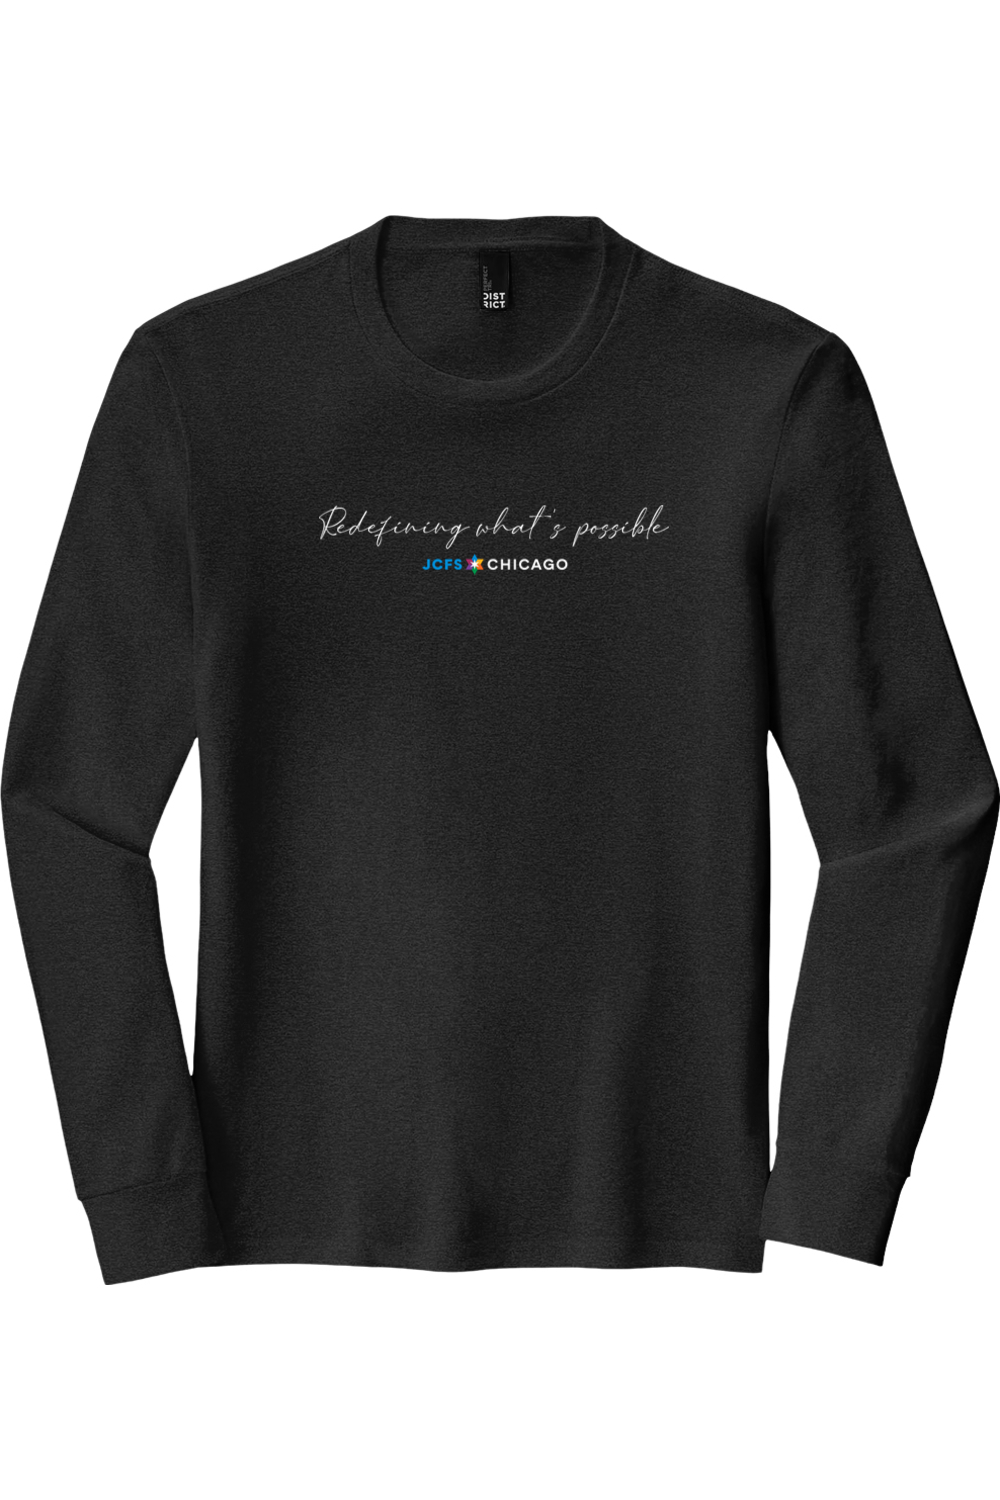 District Perfect Tri Long Sleeve Tee